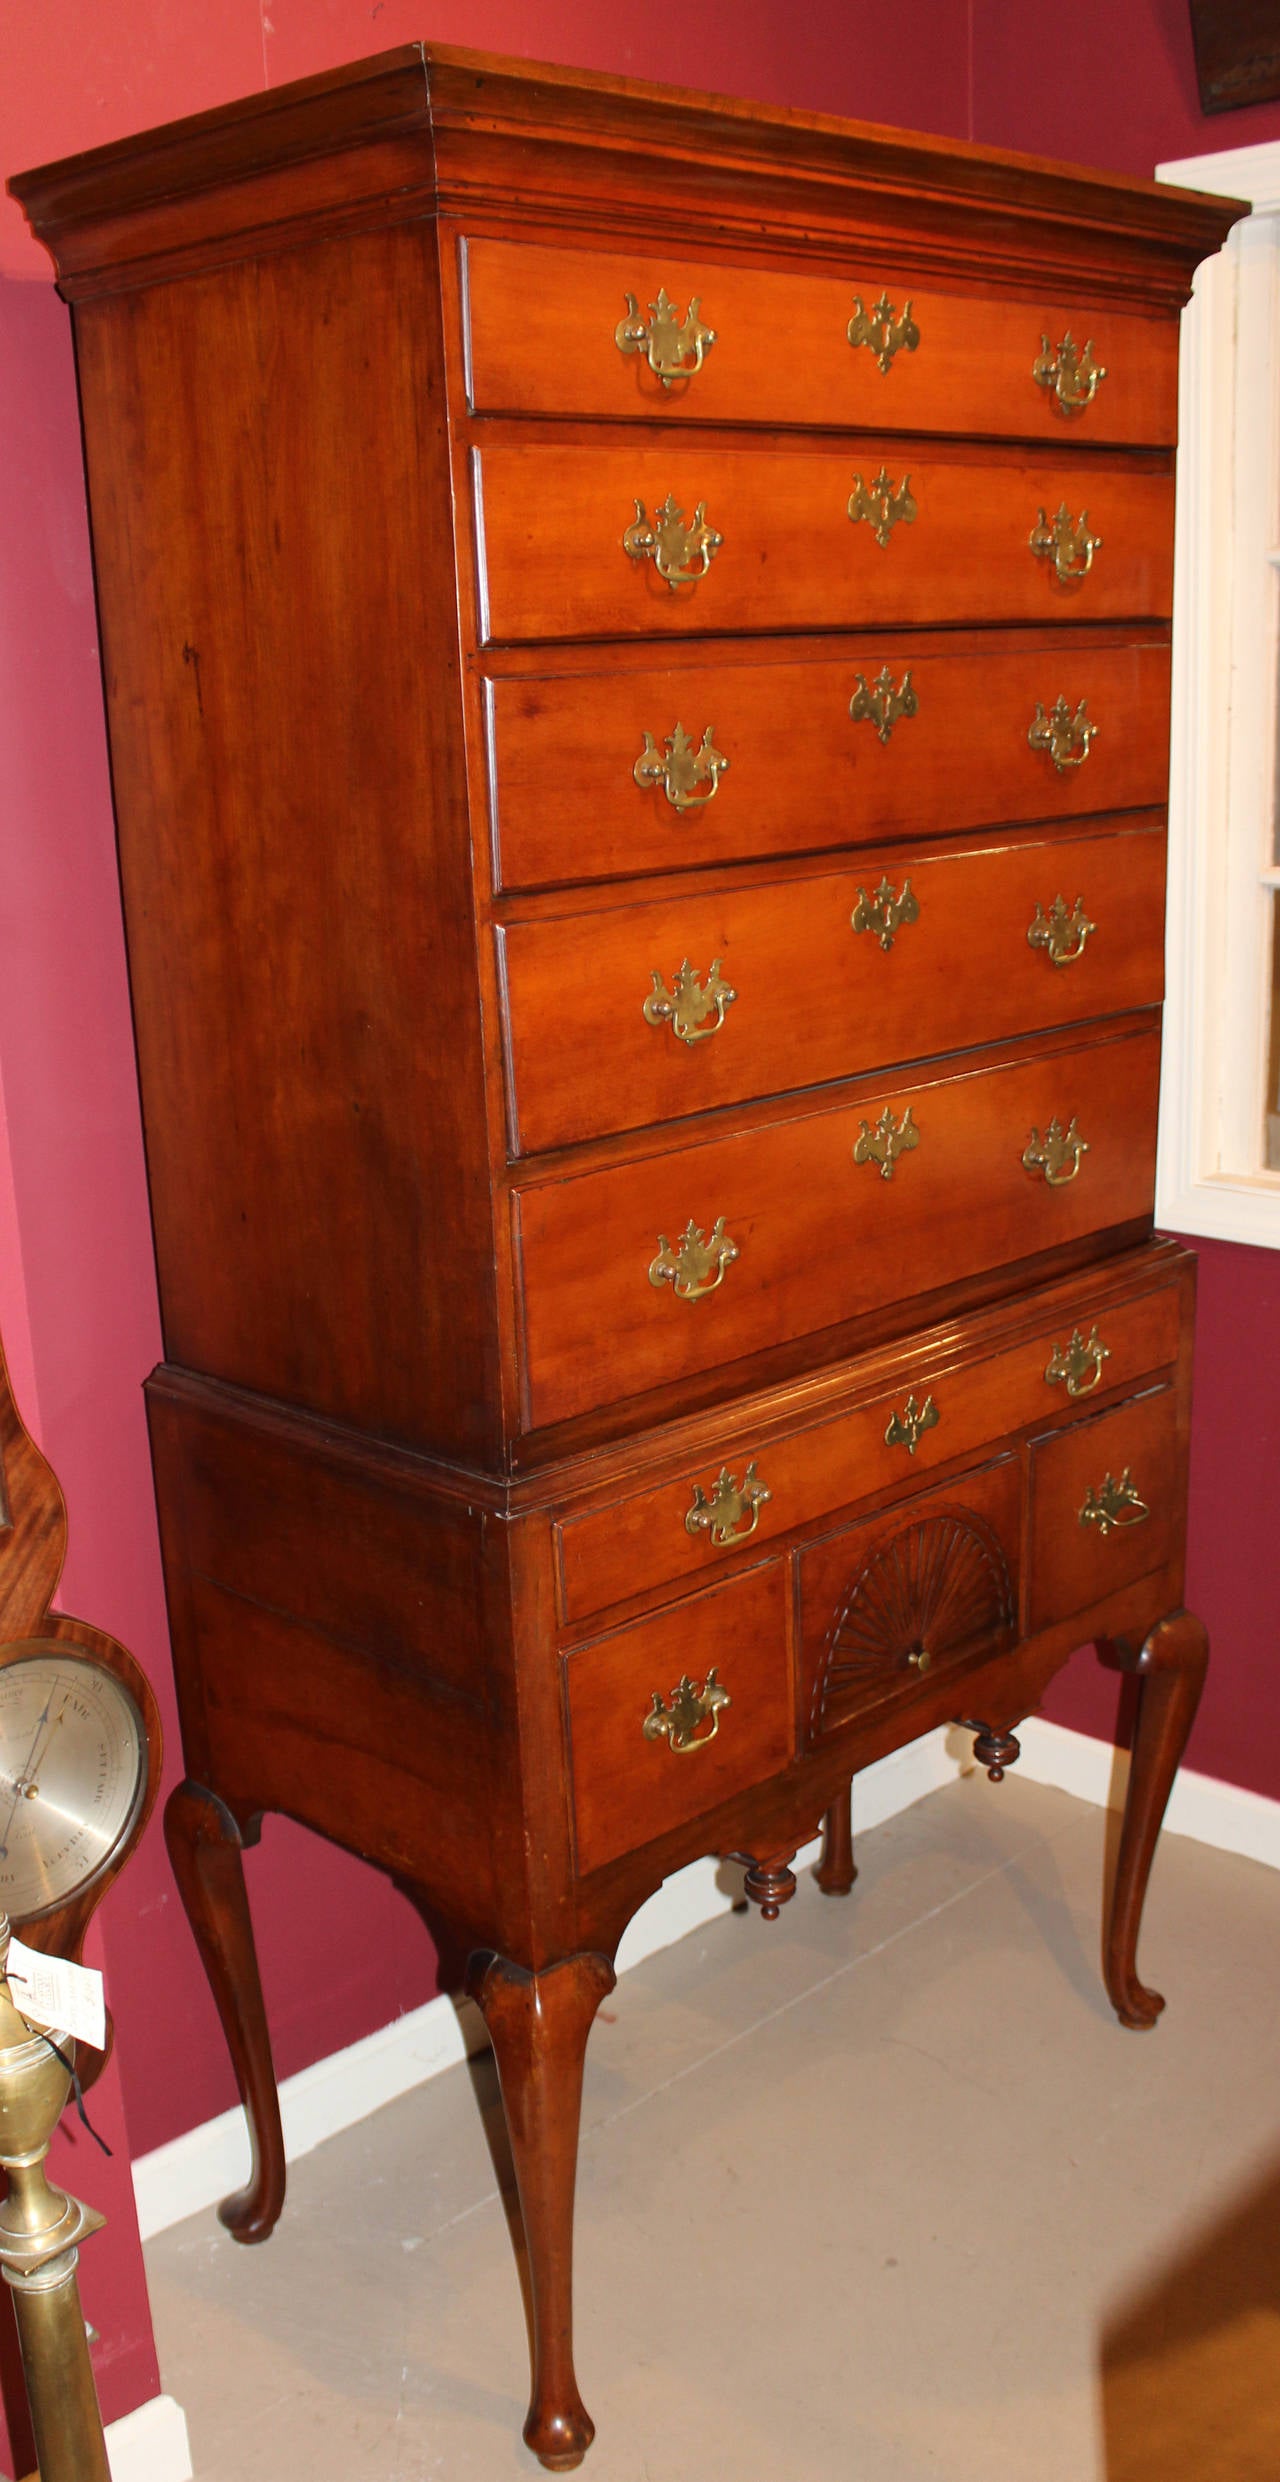 A fine 18th century cherry two part highboy, probably Connecticut in origin, with five drawer top with molded cornice over a base with one long drawer over three fitted drawers, a carved radiating fan decoration on the center drawer front, all